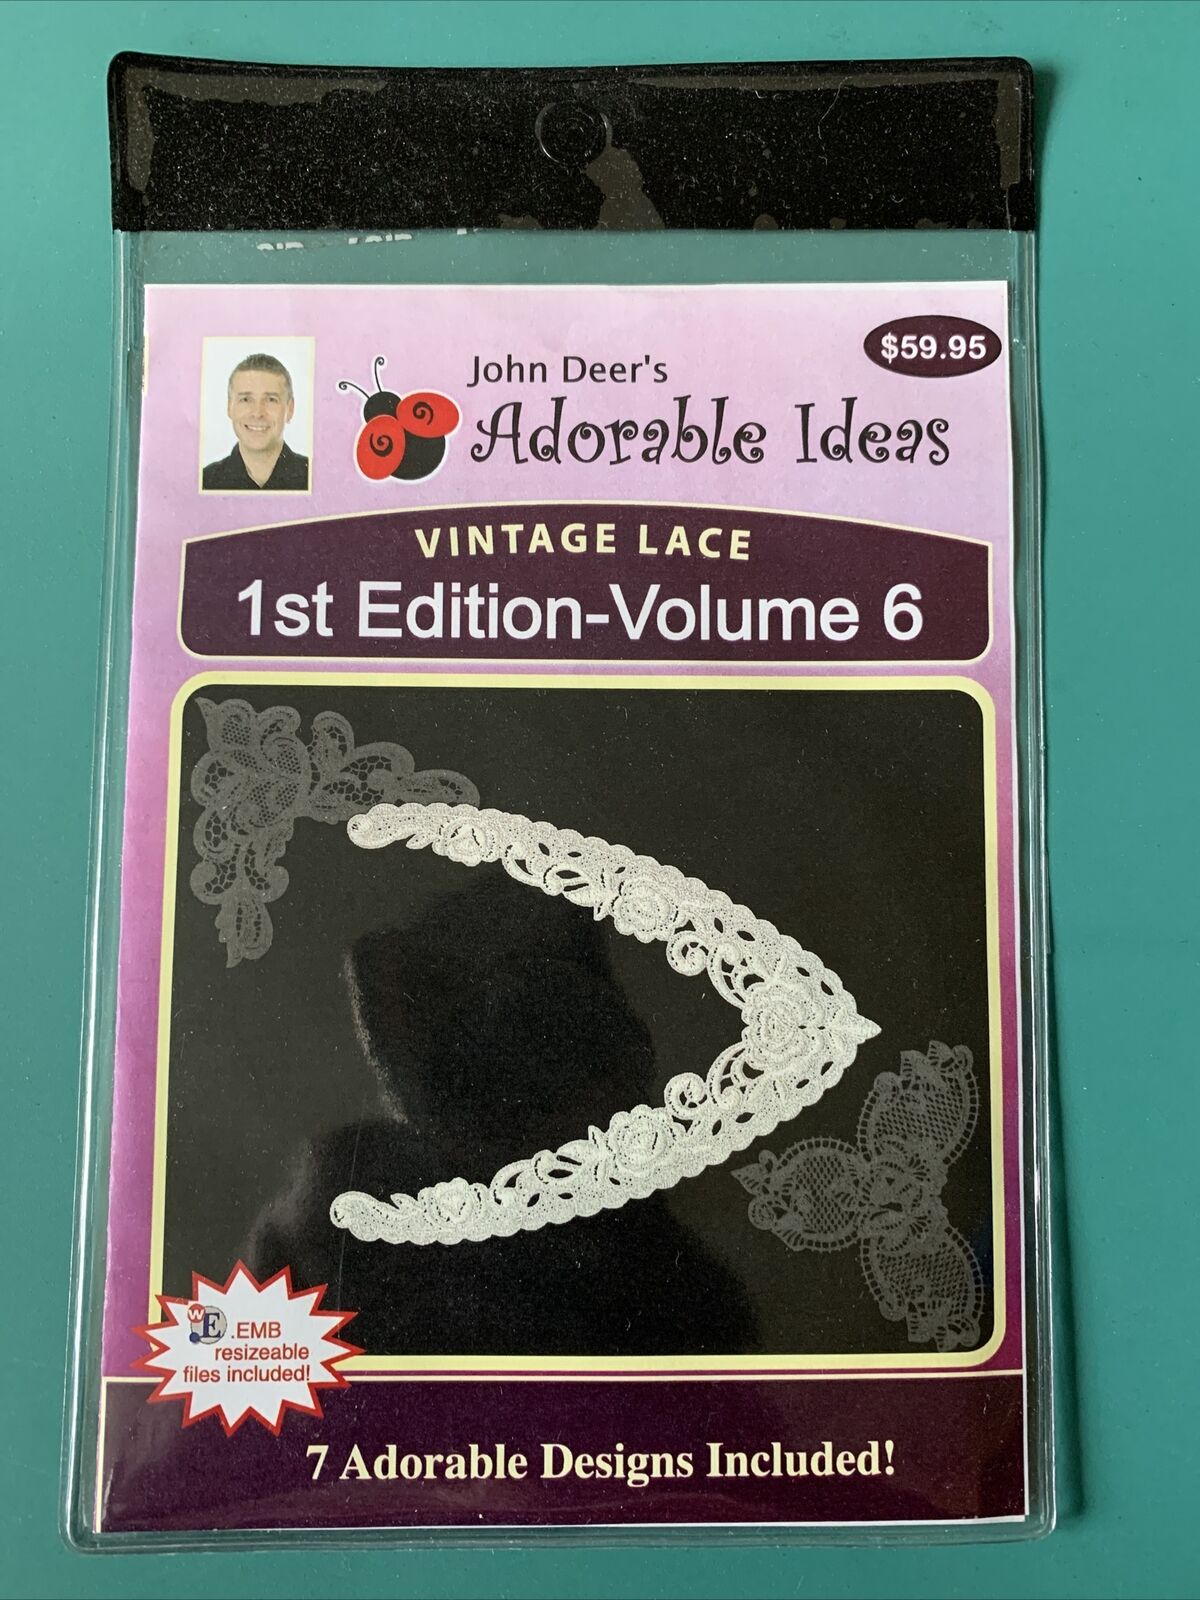 John Deer's Adorable Ideas Machine Embroidery Cd Vintage Lace 1st Edition Volume